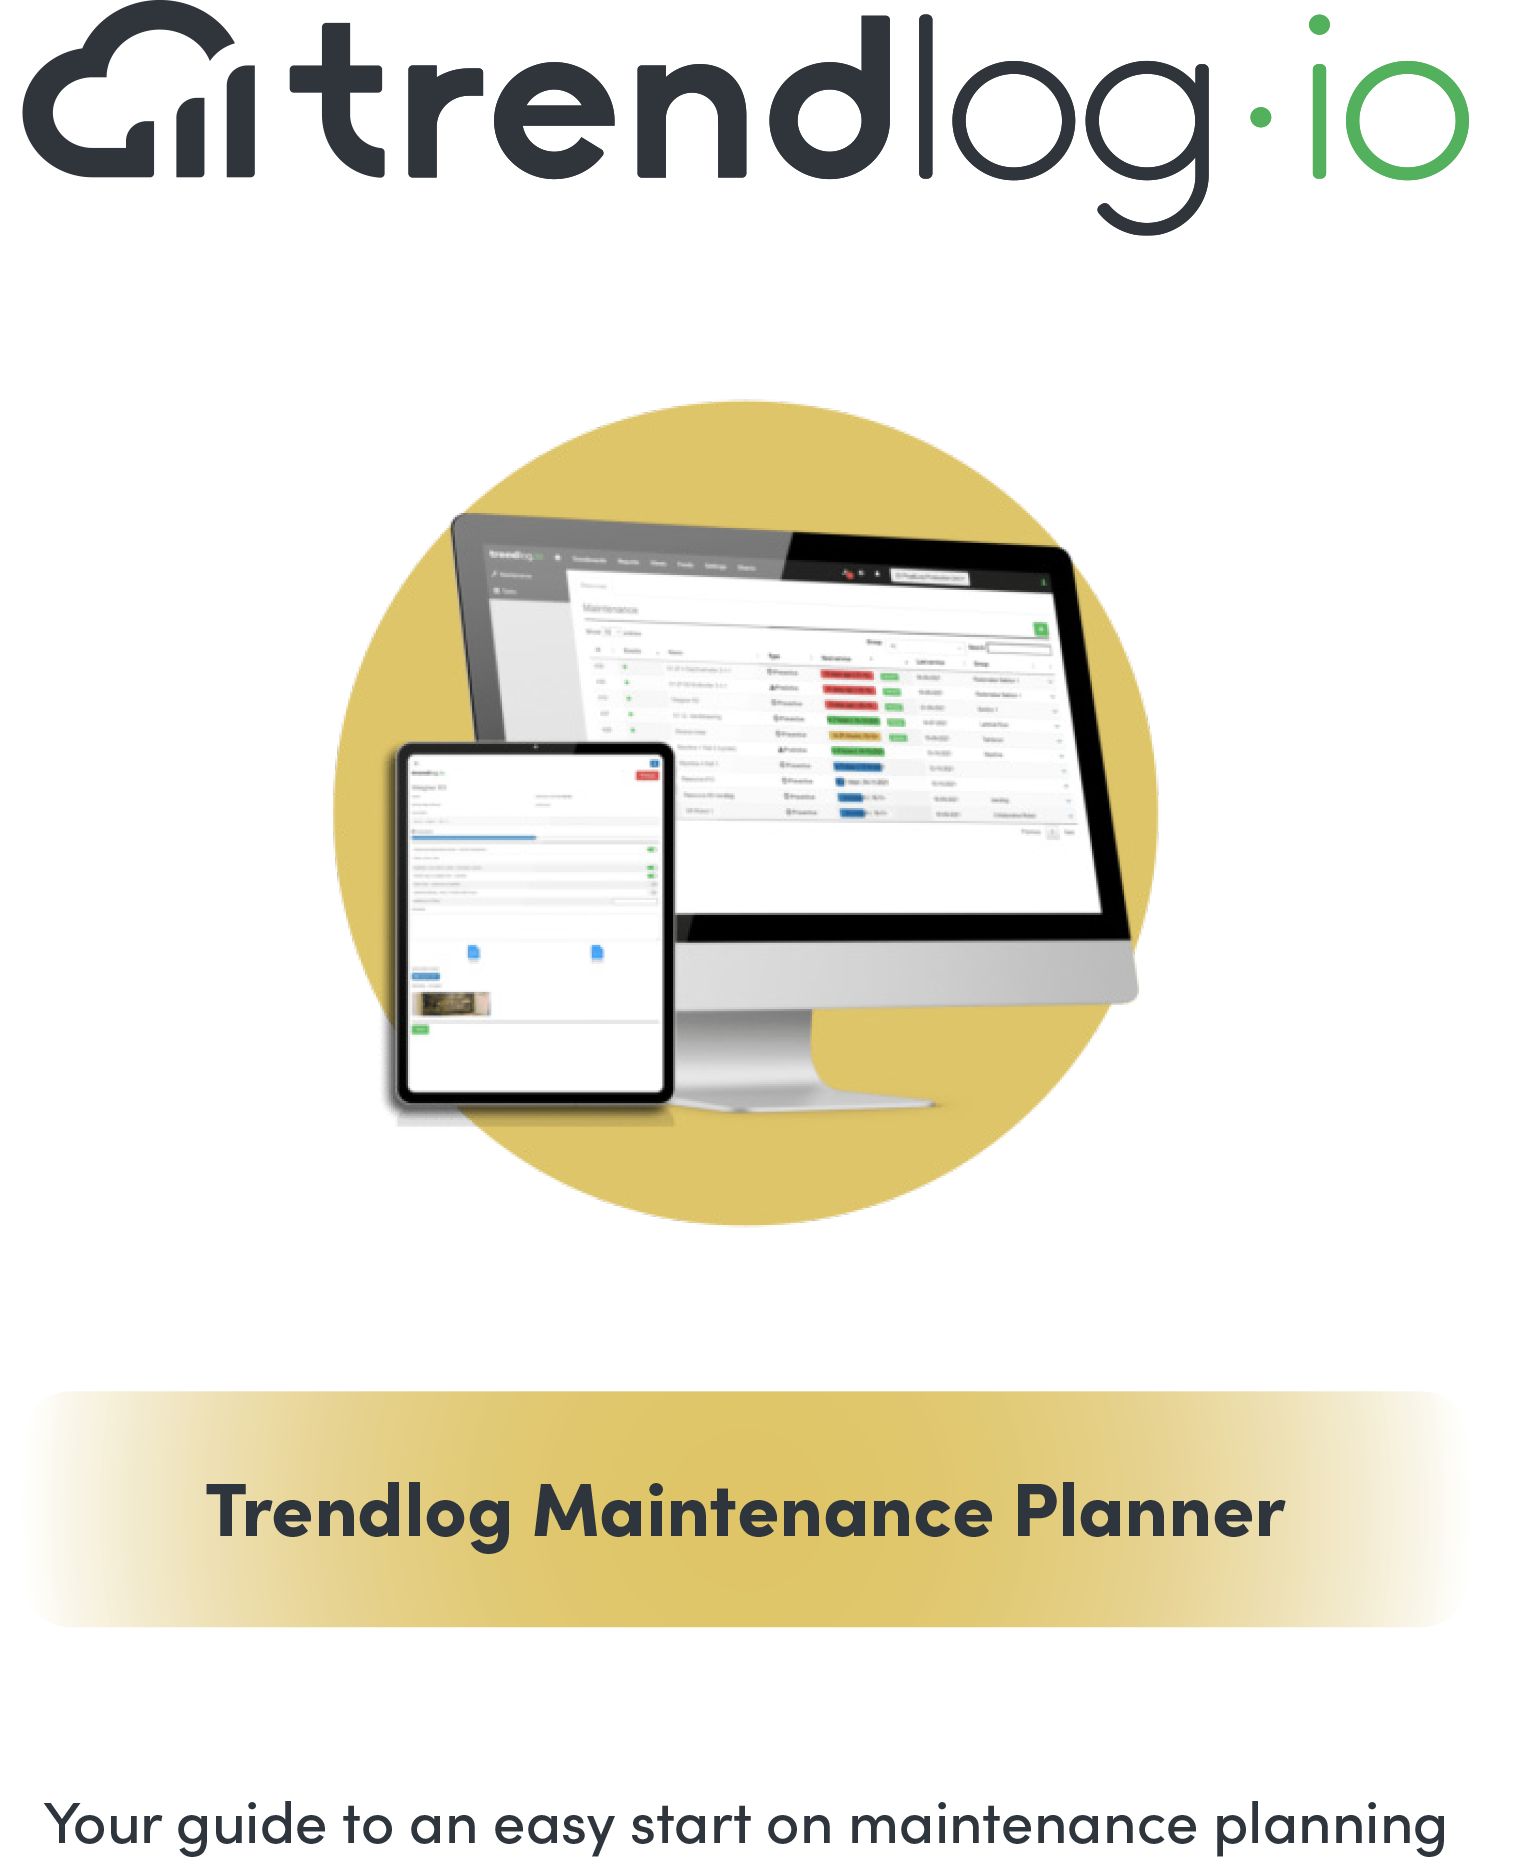 Maintenance Planner - directions for use